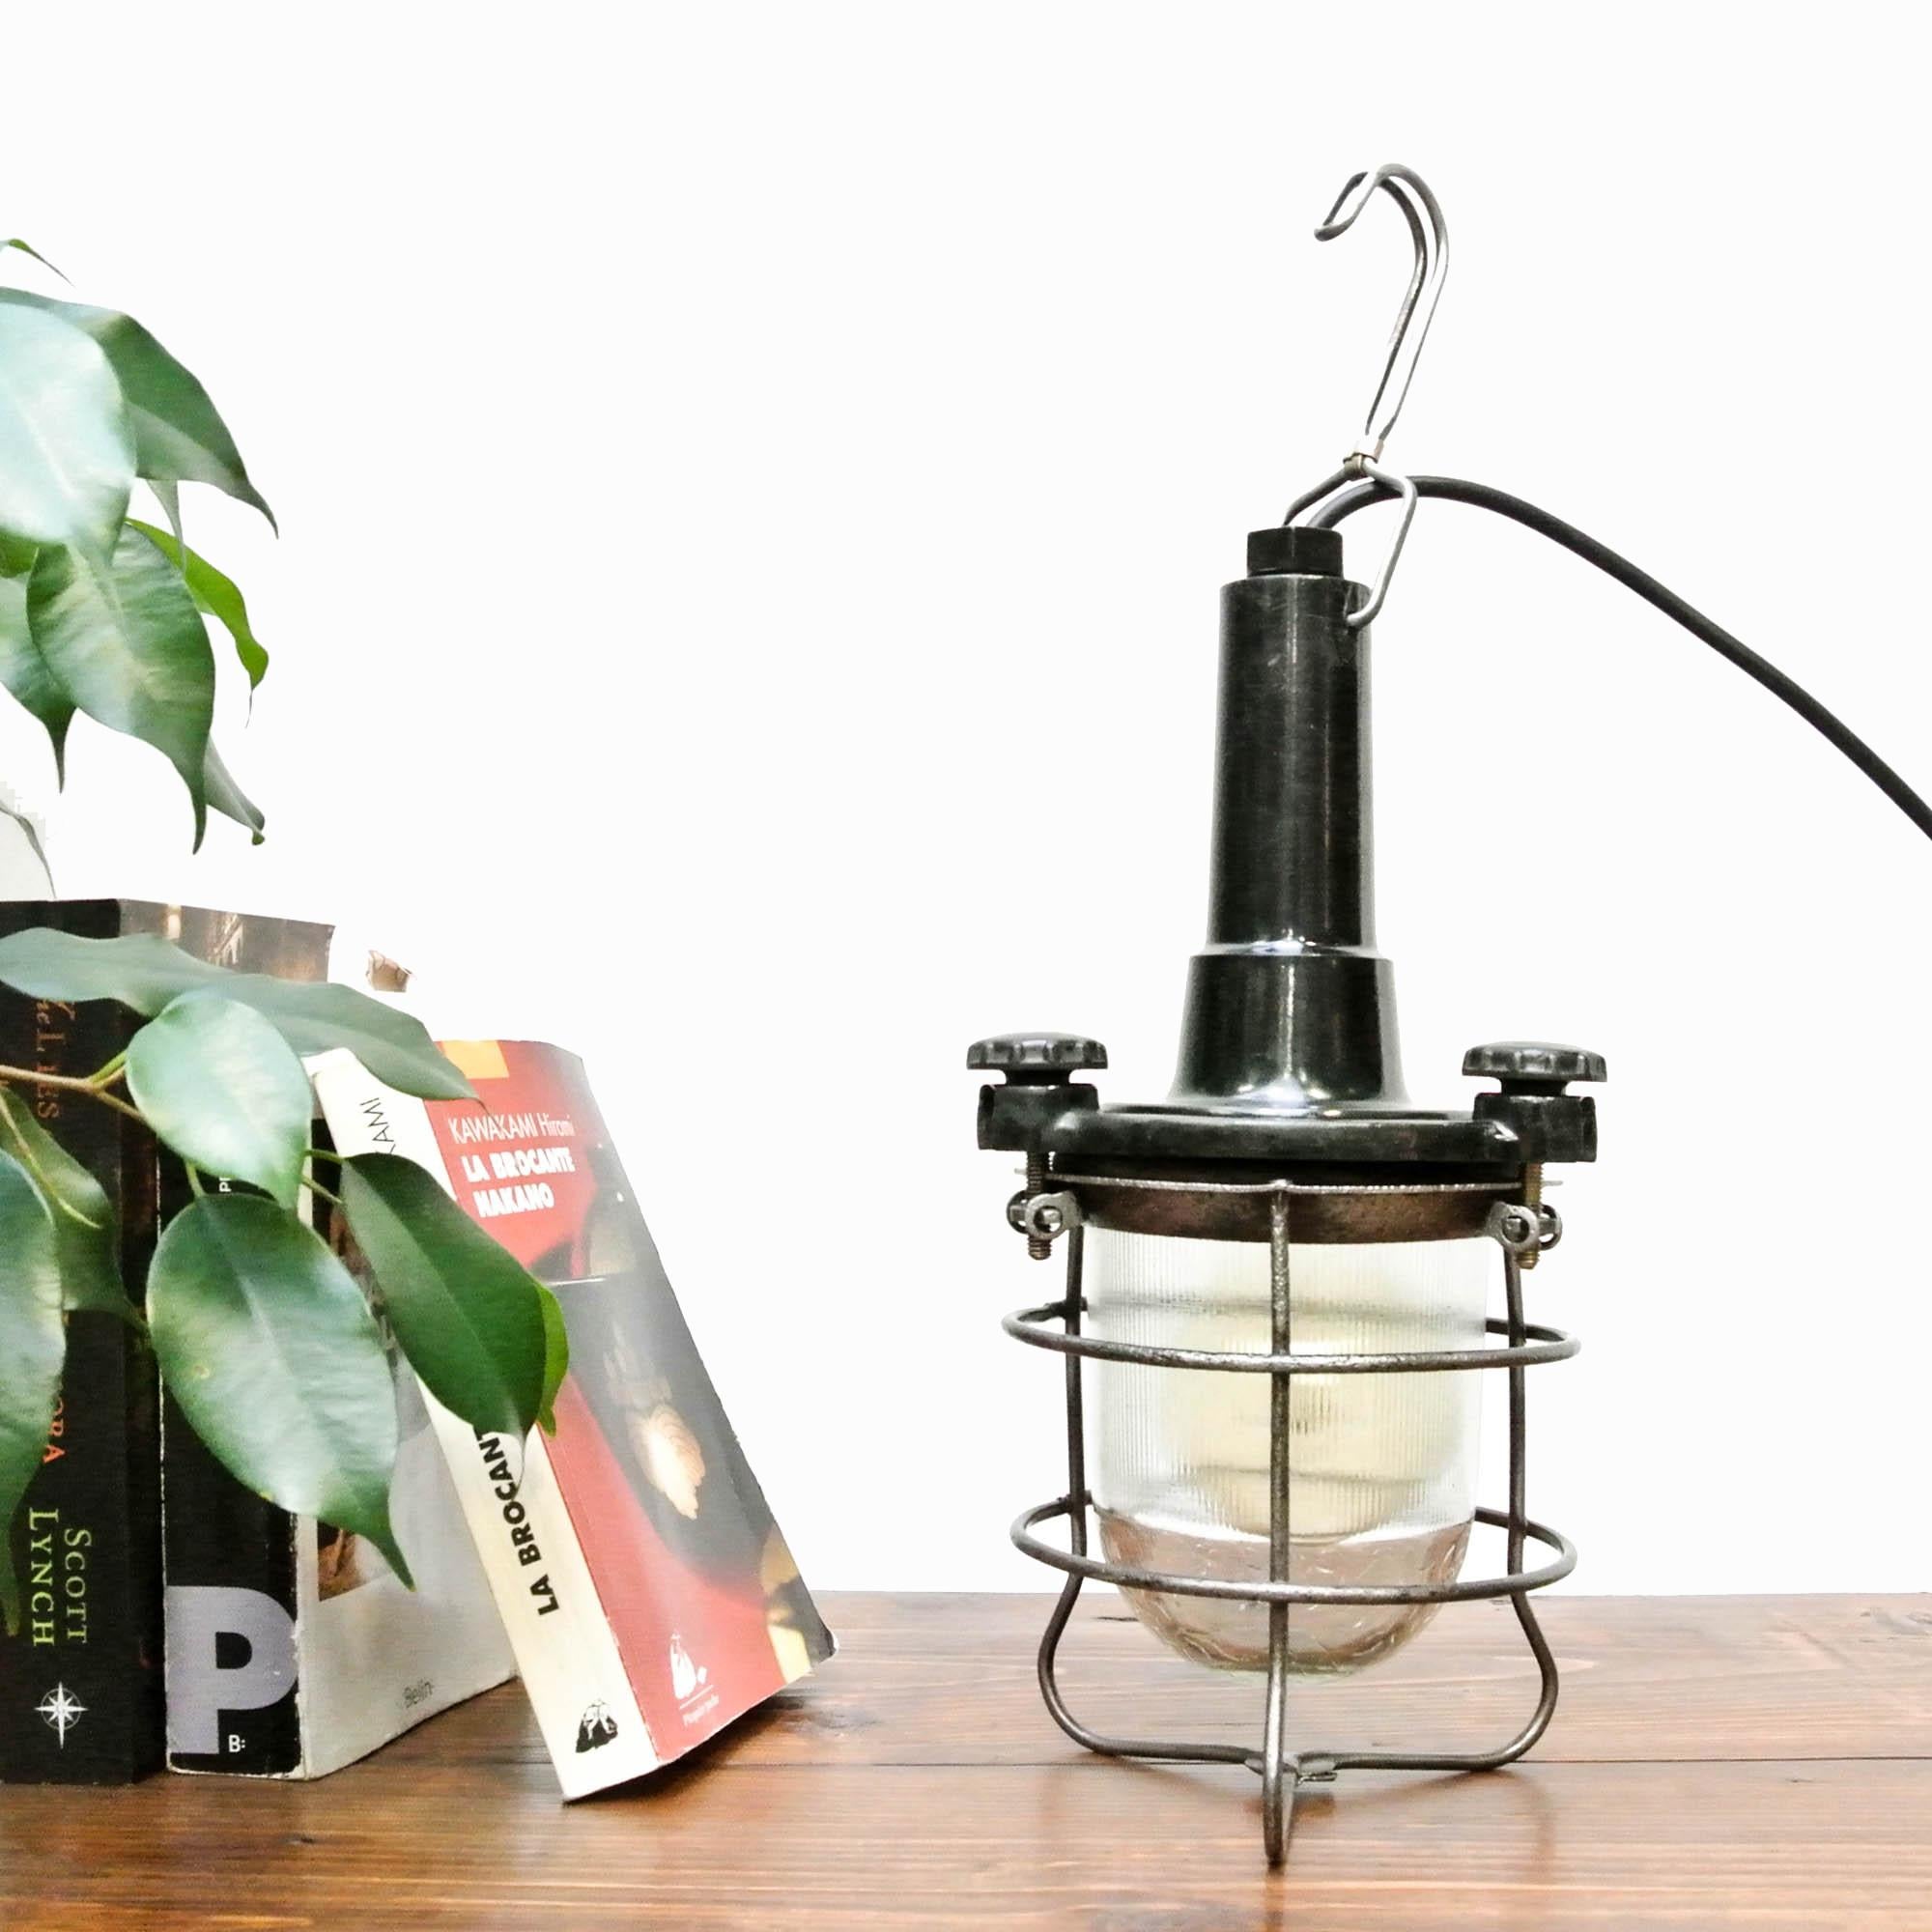 Very beautiful vintage portable lamp (origin: CCCP) made of black bakelite (stripped and polished). Opening system: 3 screws with head made of bakelite too. Nice beveled glass in 2 differents way giving a lovely lighting, protected by a grid